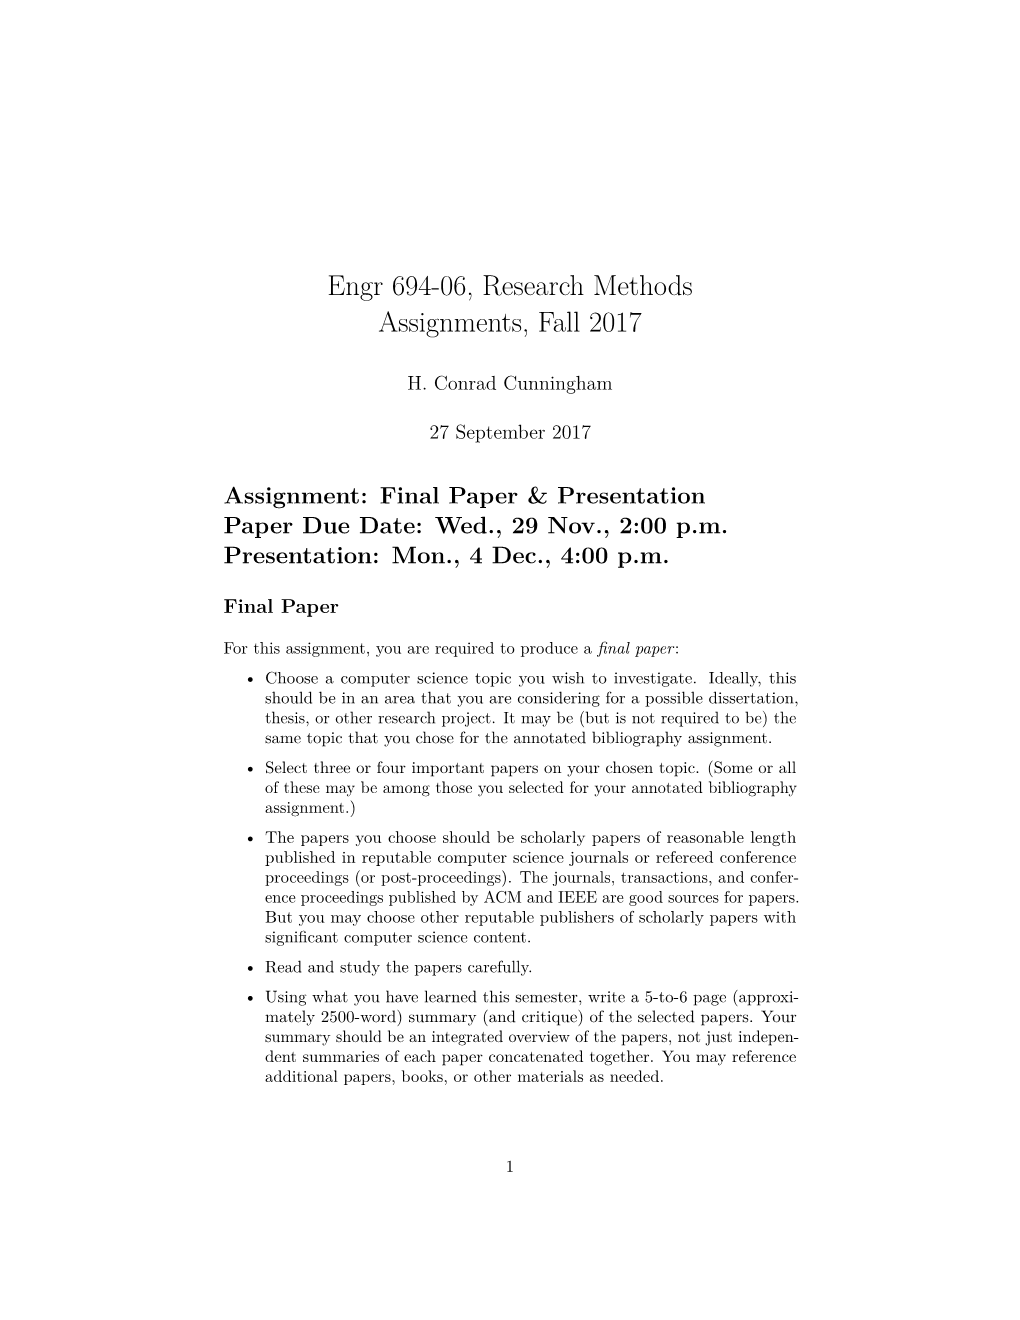 Engr 694-06, Research Methods Assignments, Fall 2017